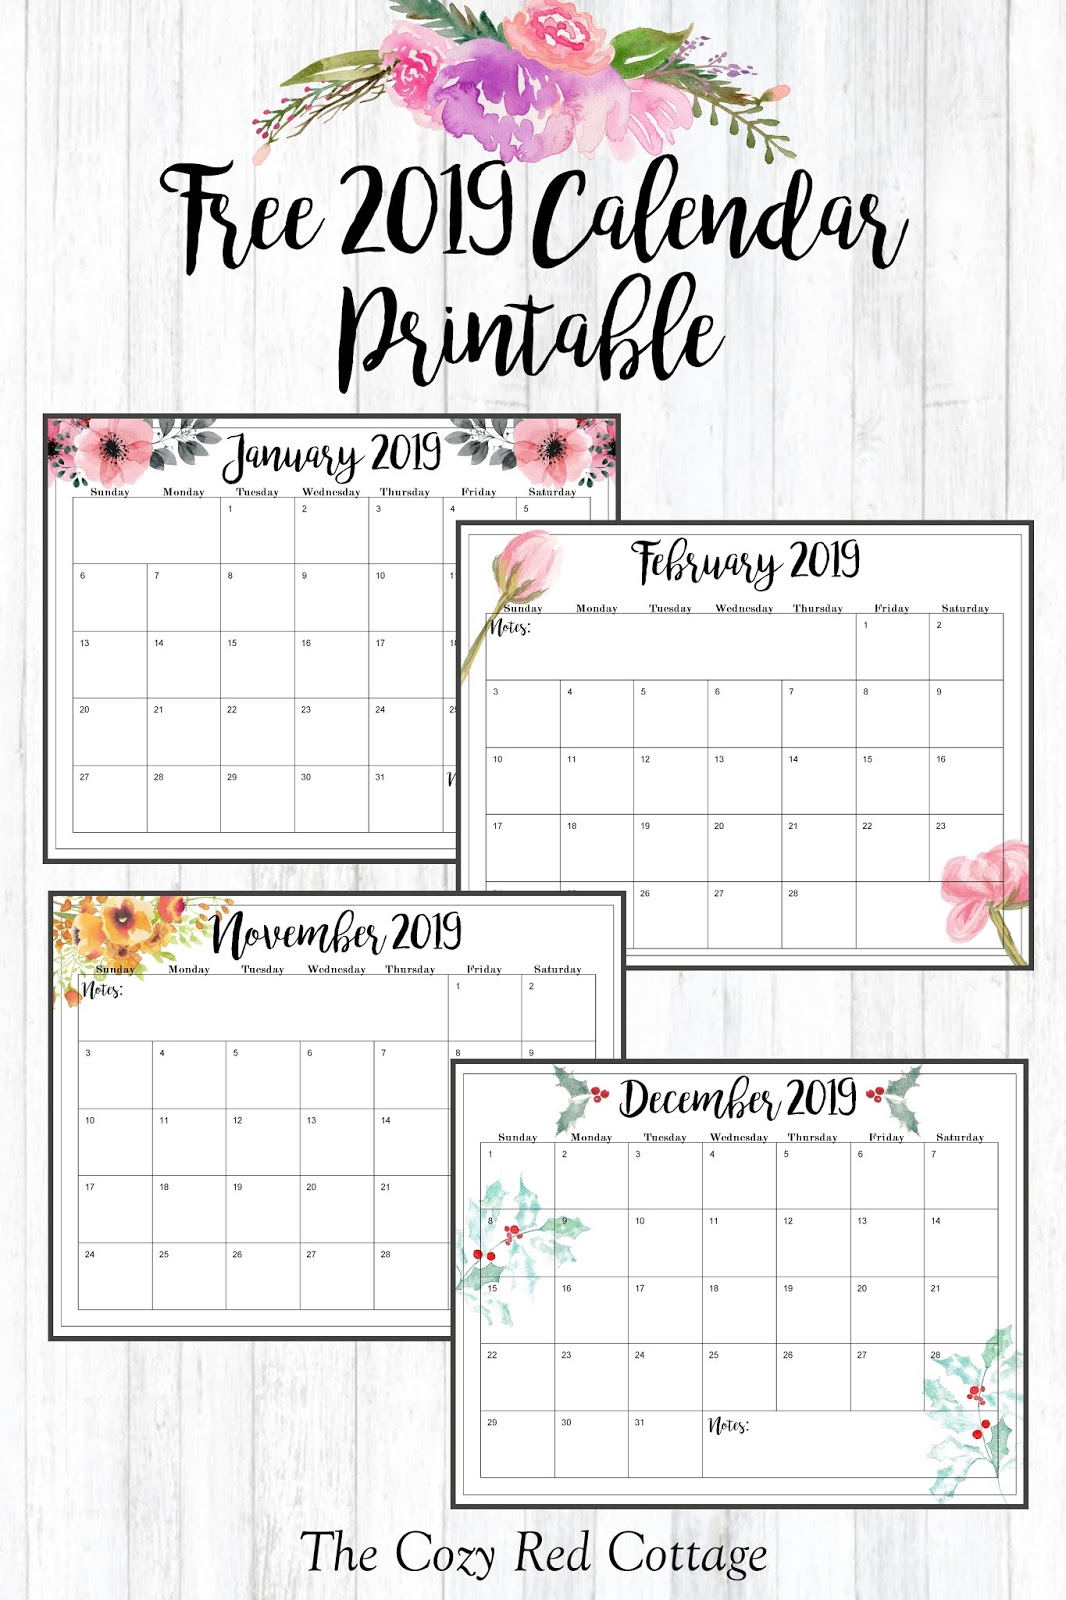 The Cozy Red Cottage Free 2019 Calendar Printable